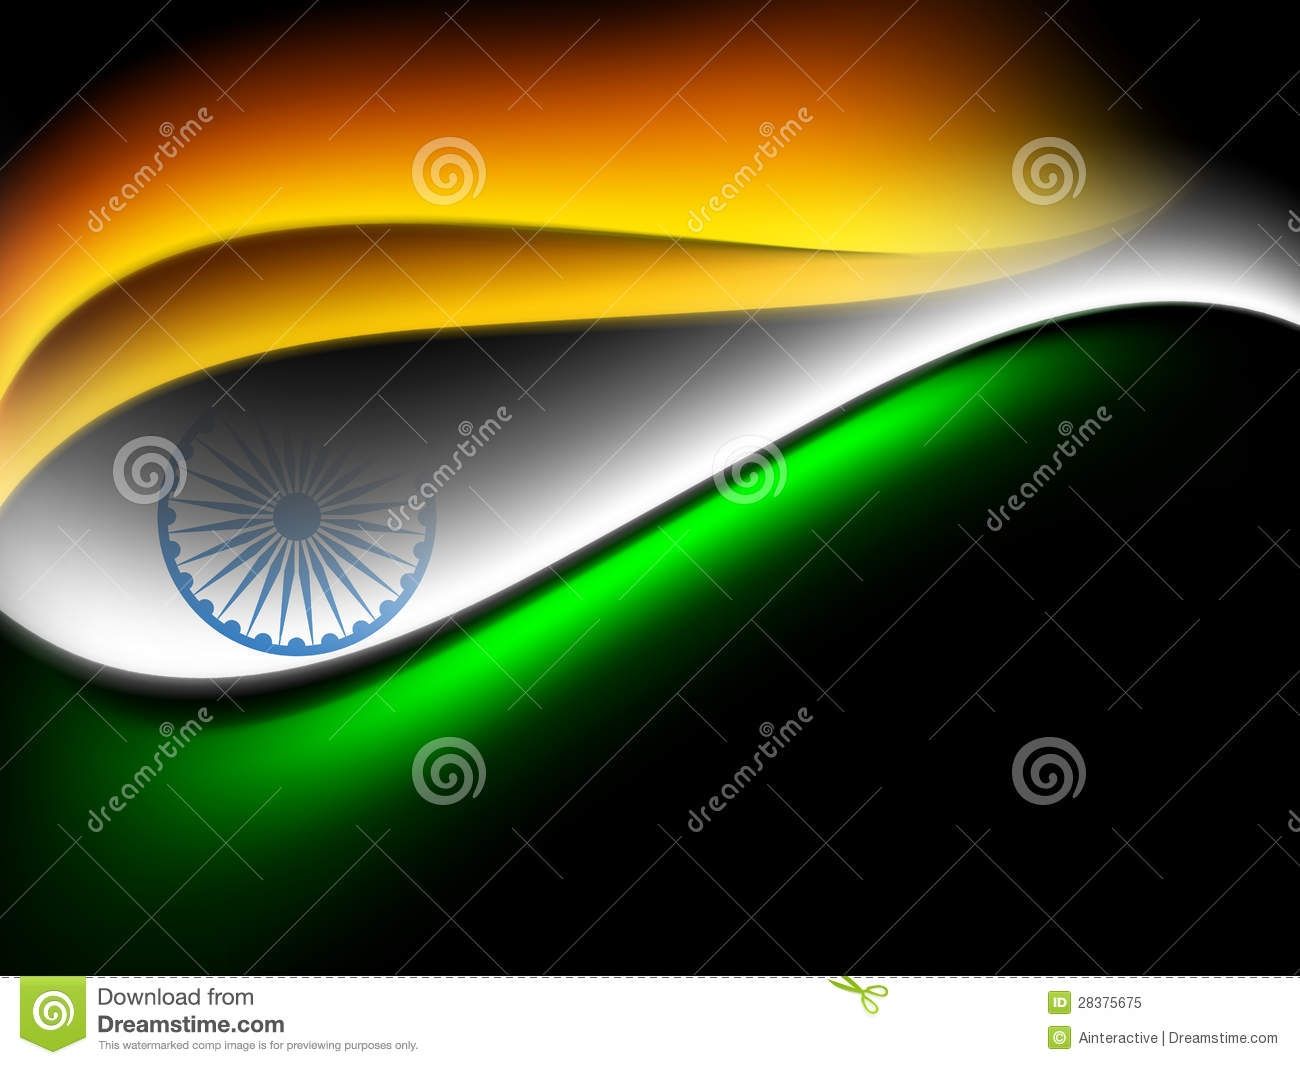 India PC Wallpapers on WallpaperDog